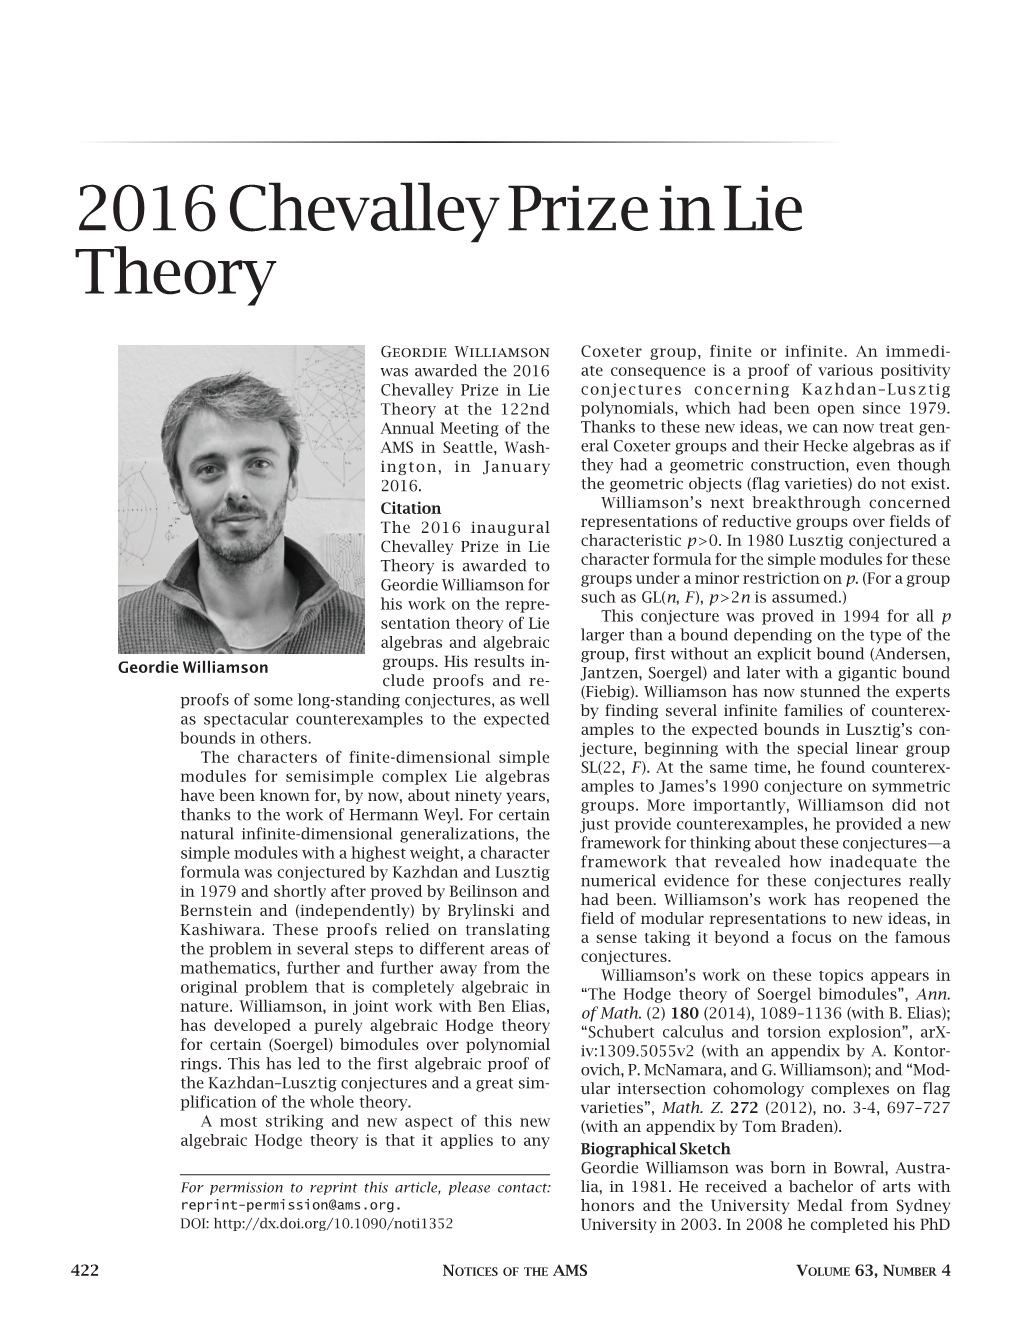 2016 Chevalley Prize in Lie Theory